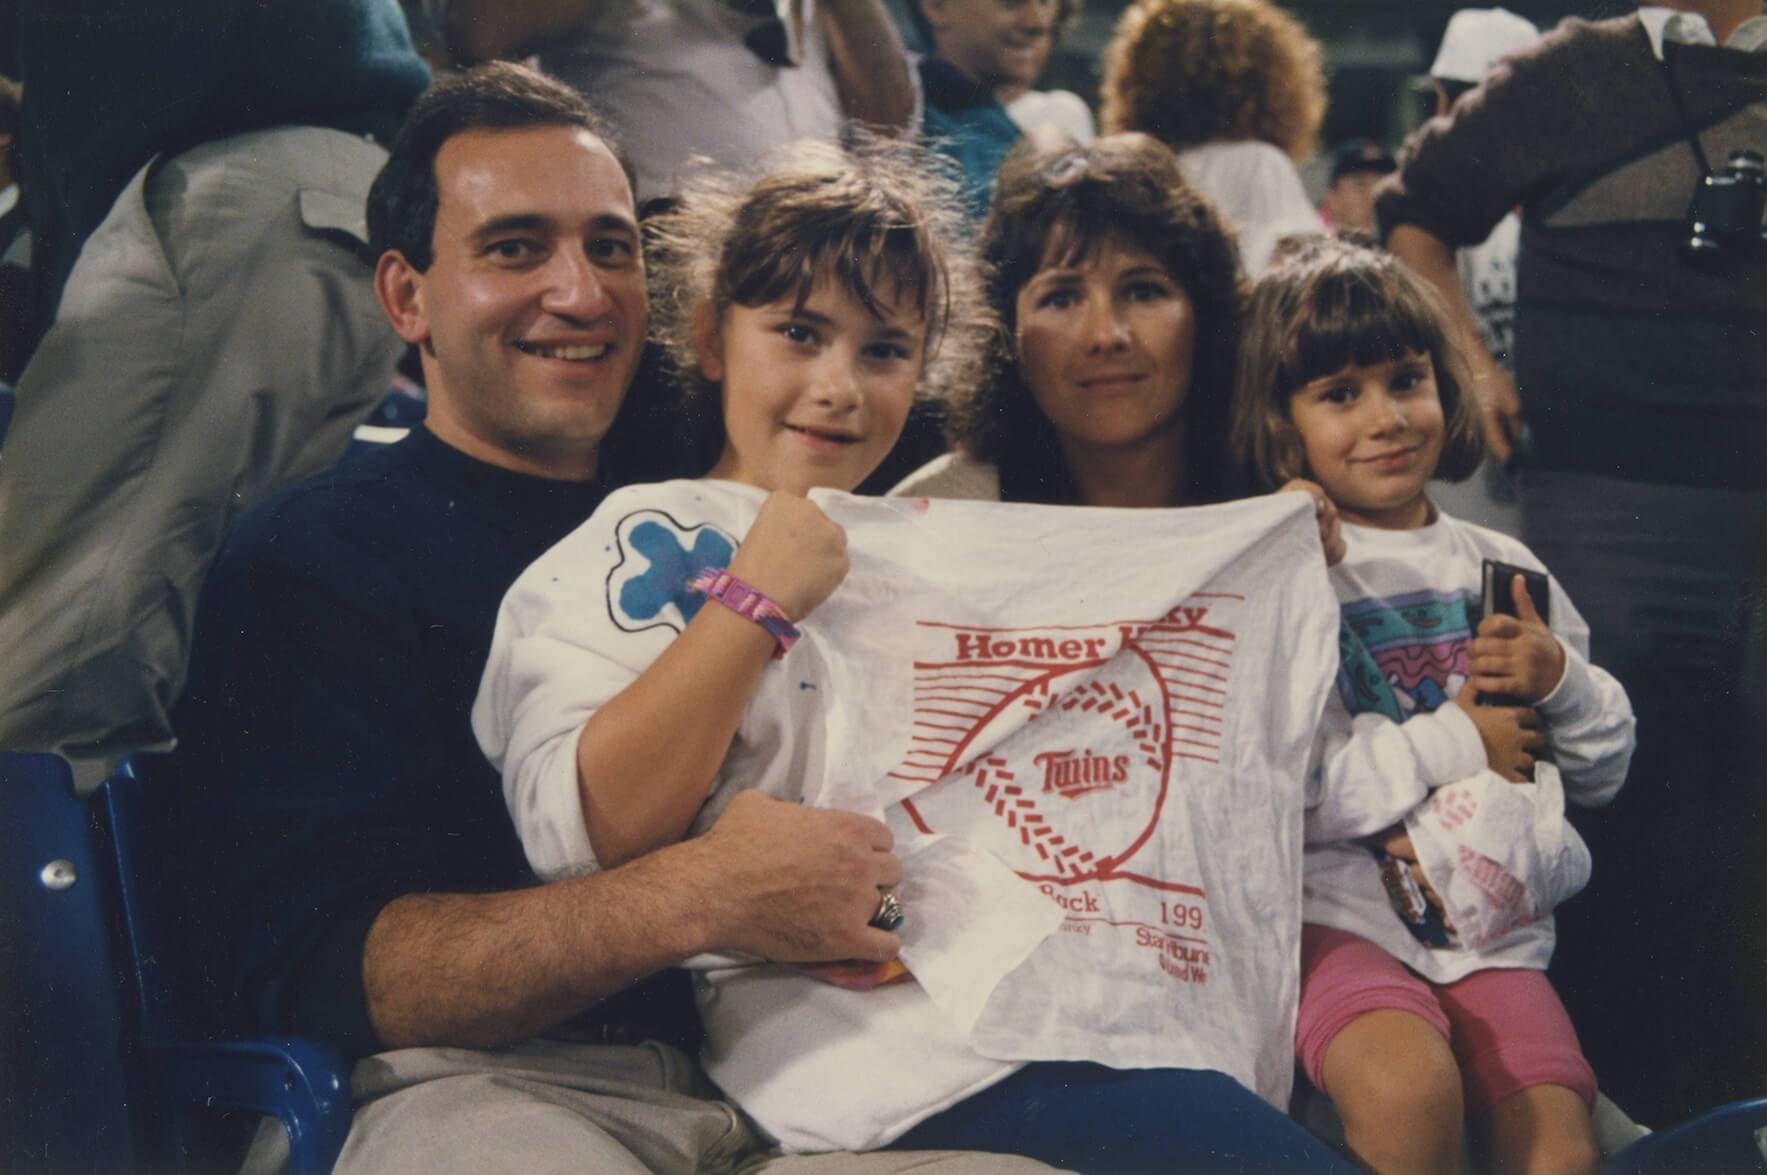 The Reis family with Homer Hanky